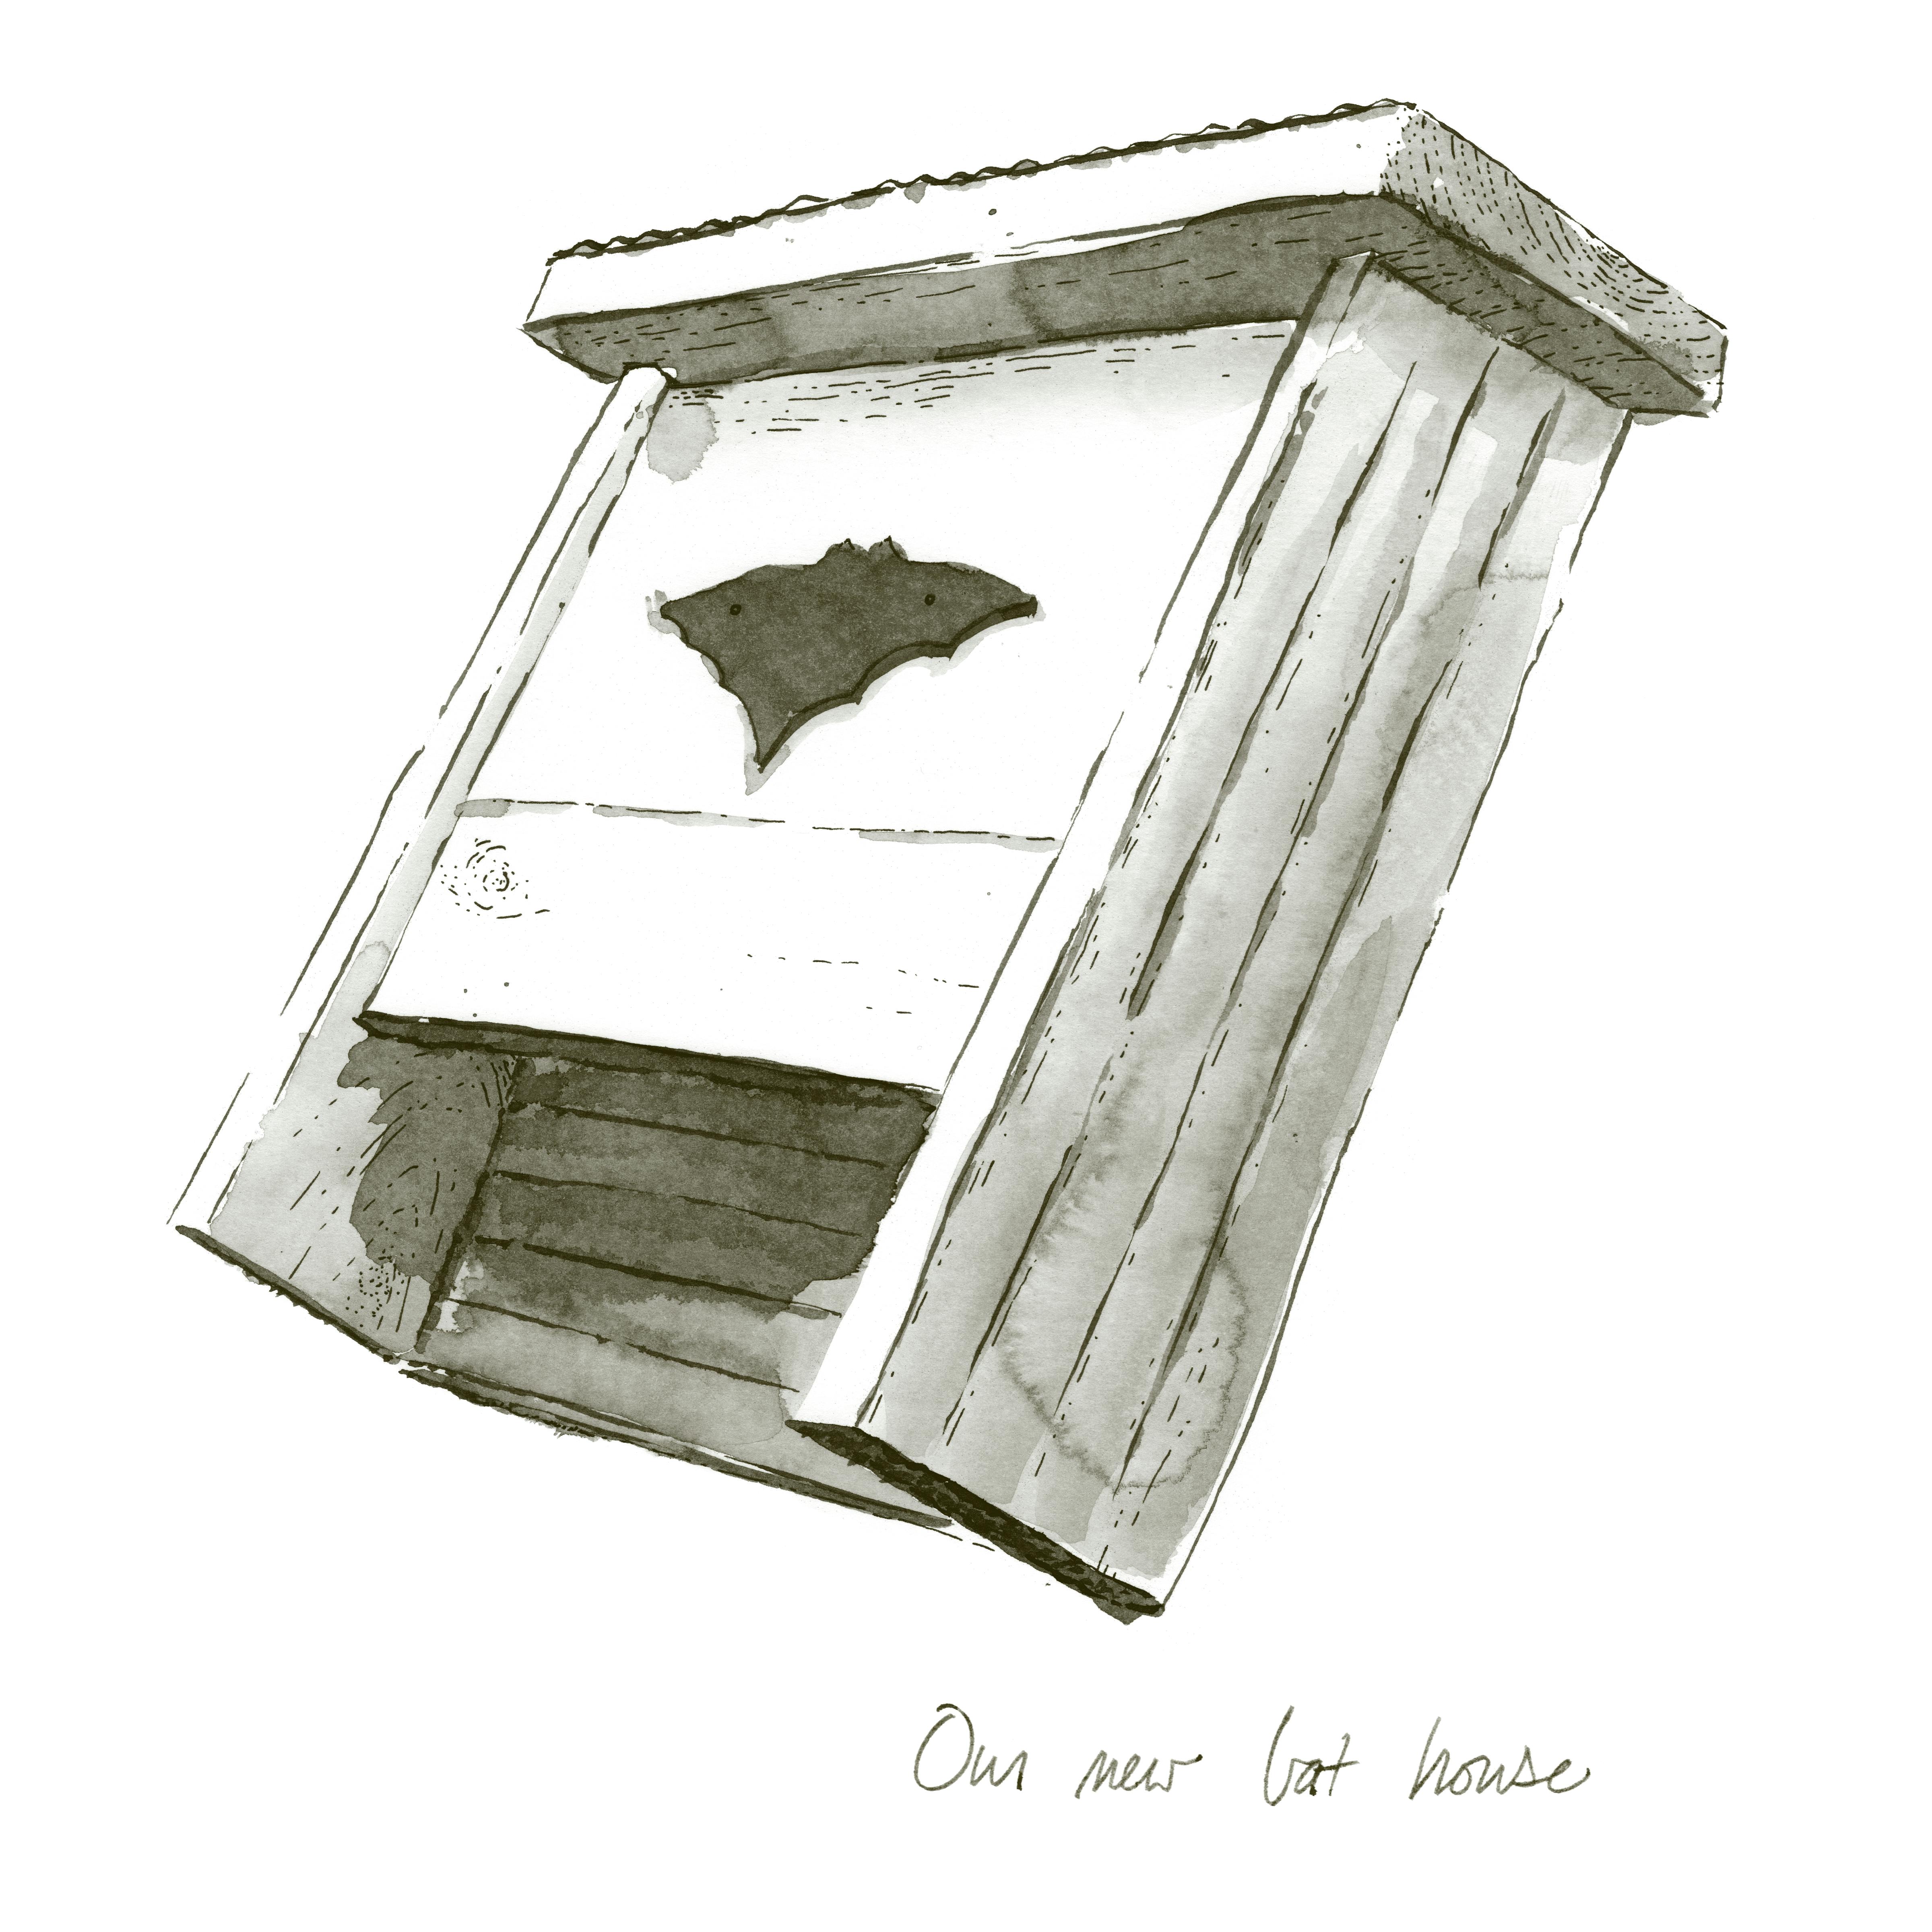 Ink wash drawing: our new bat house.